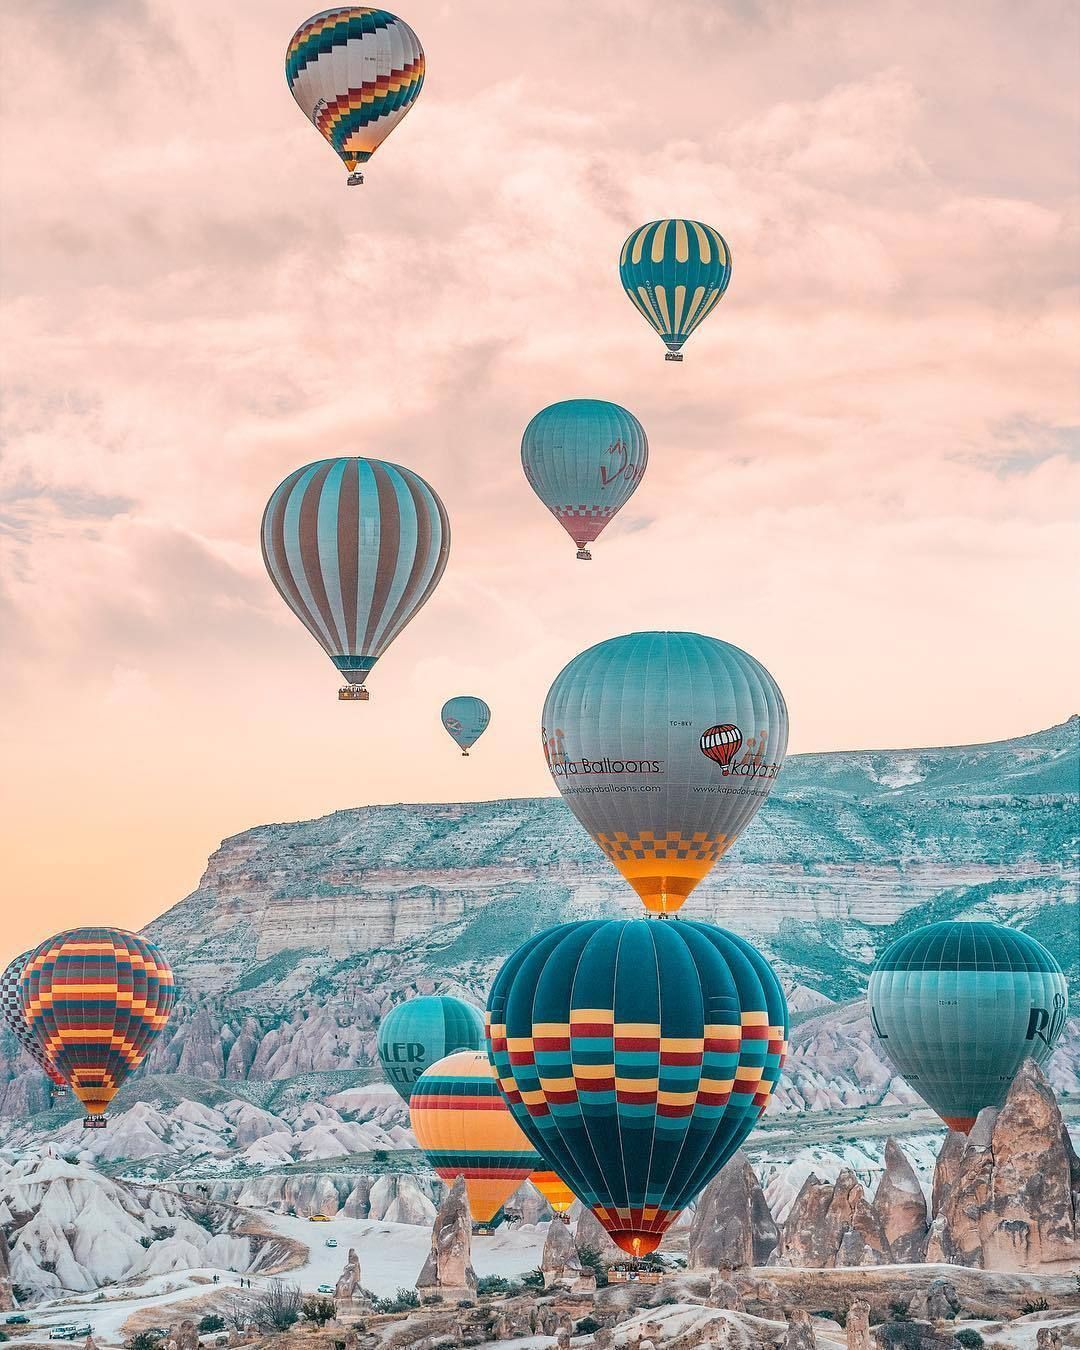 A group of hot air balloons flying in the sky - Hot air balloons